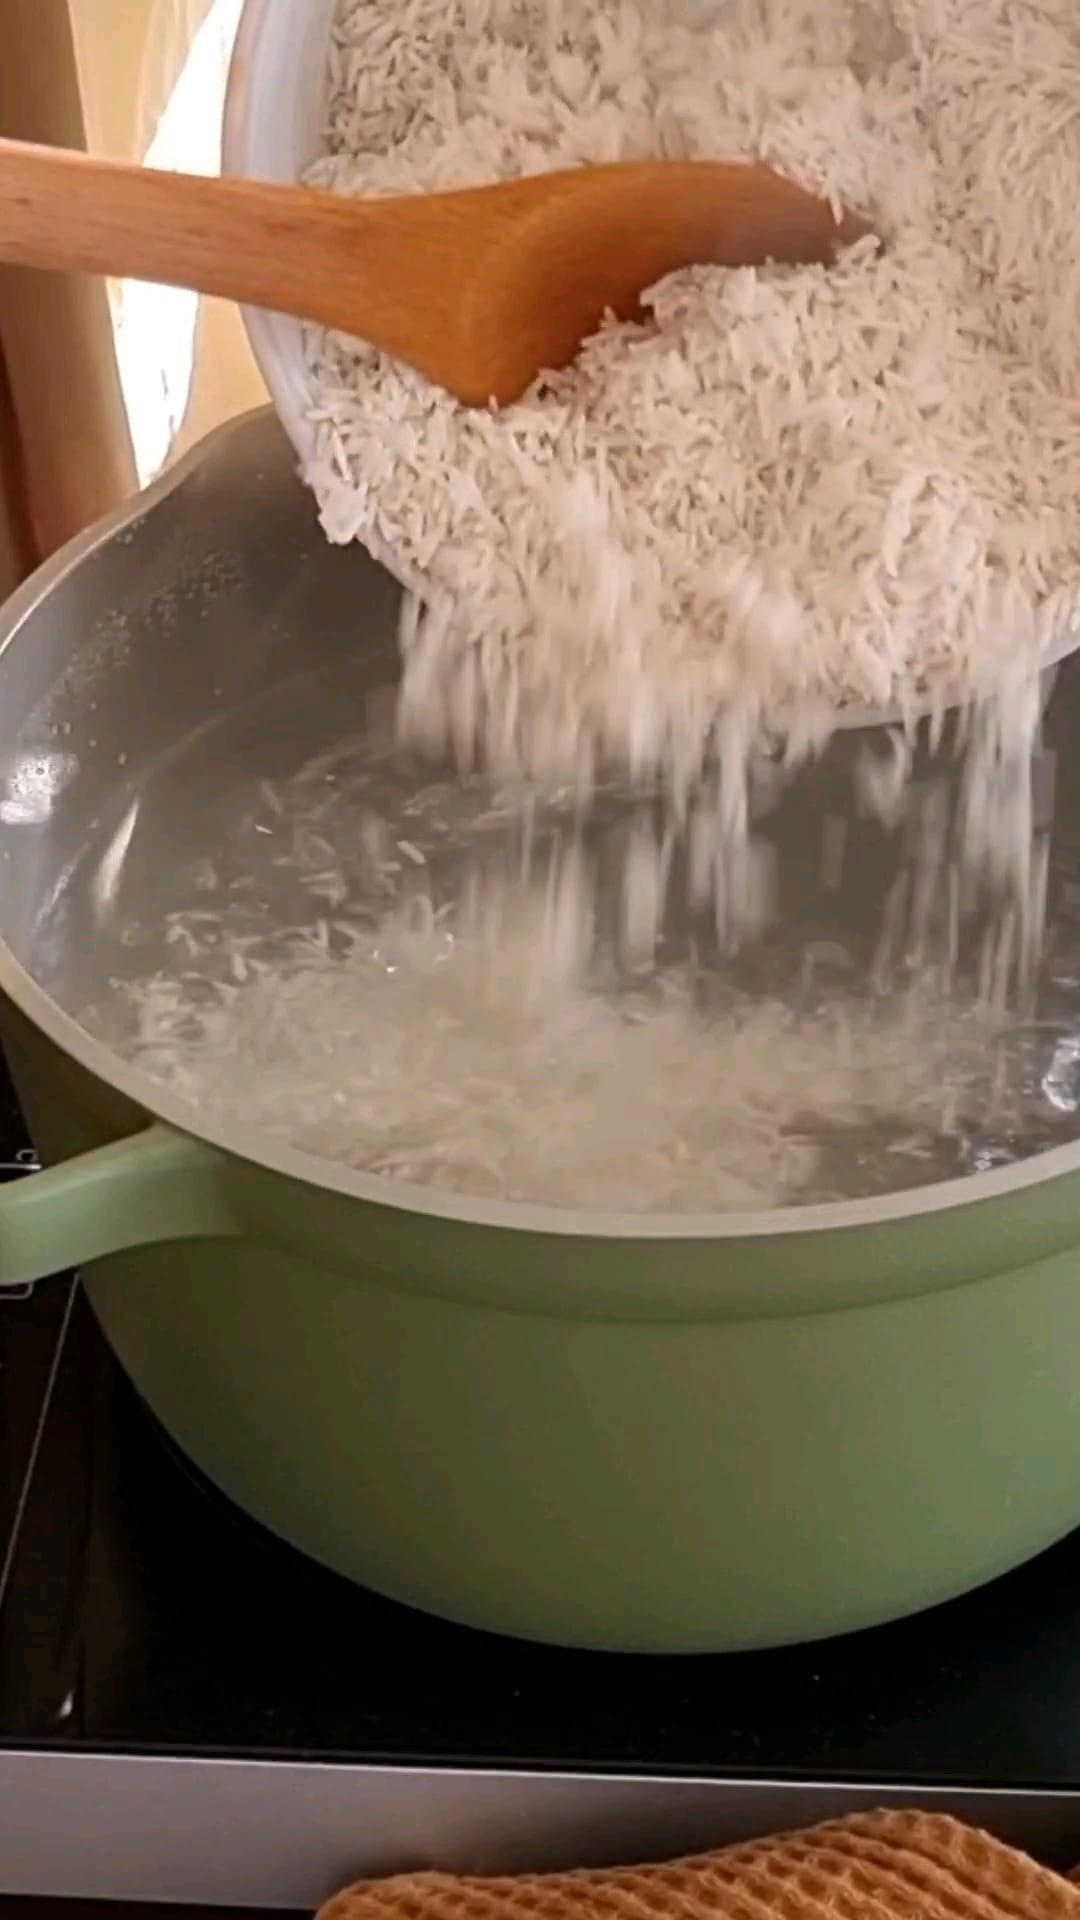 Parboil the rice in hot water for 5 minutes.